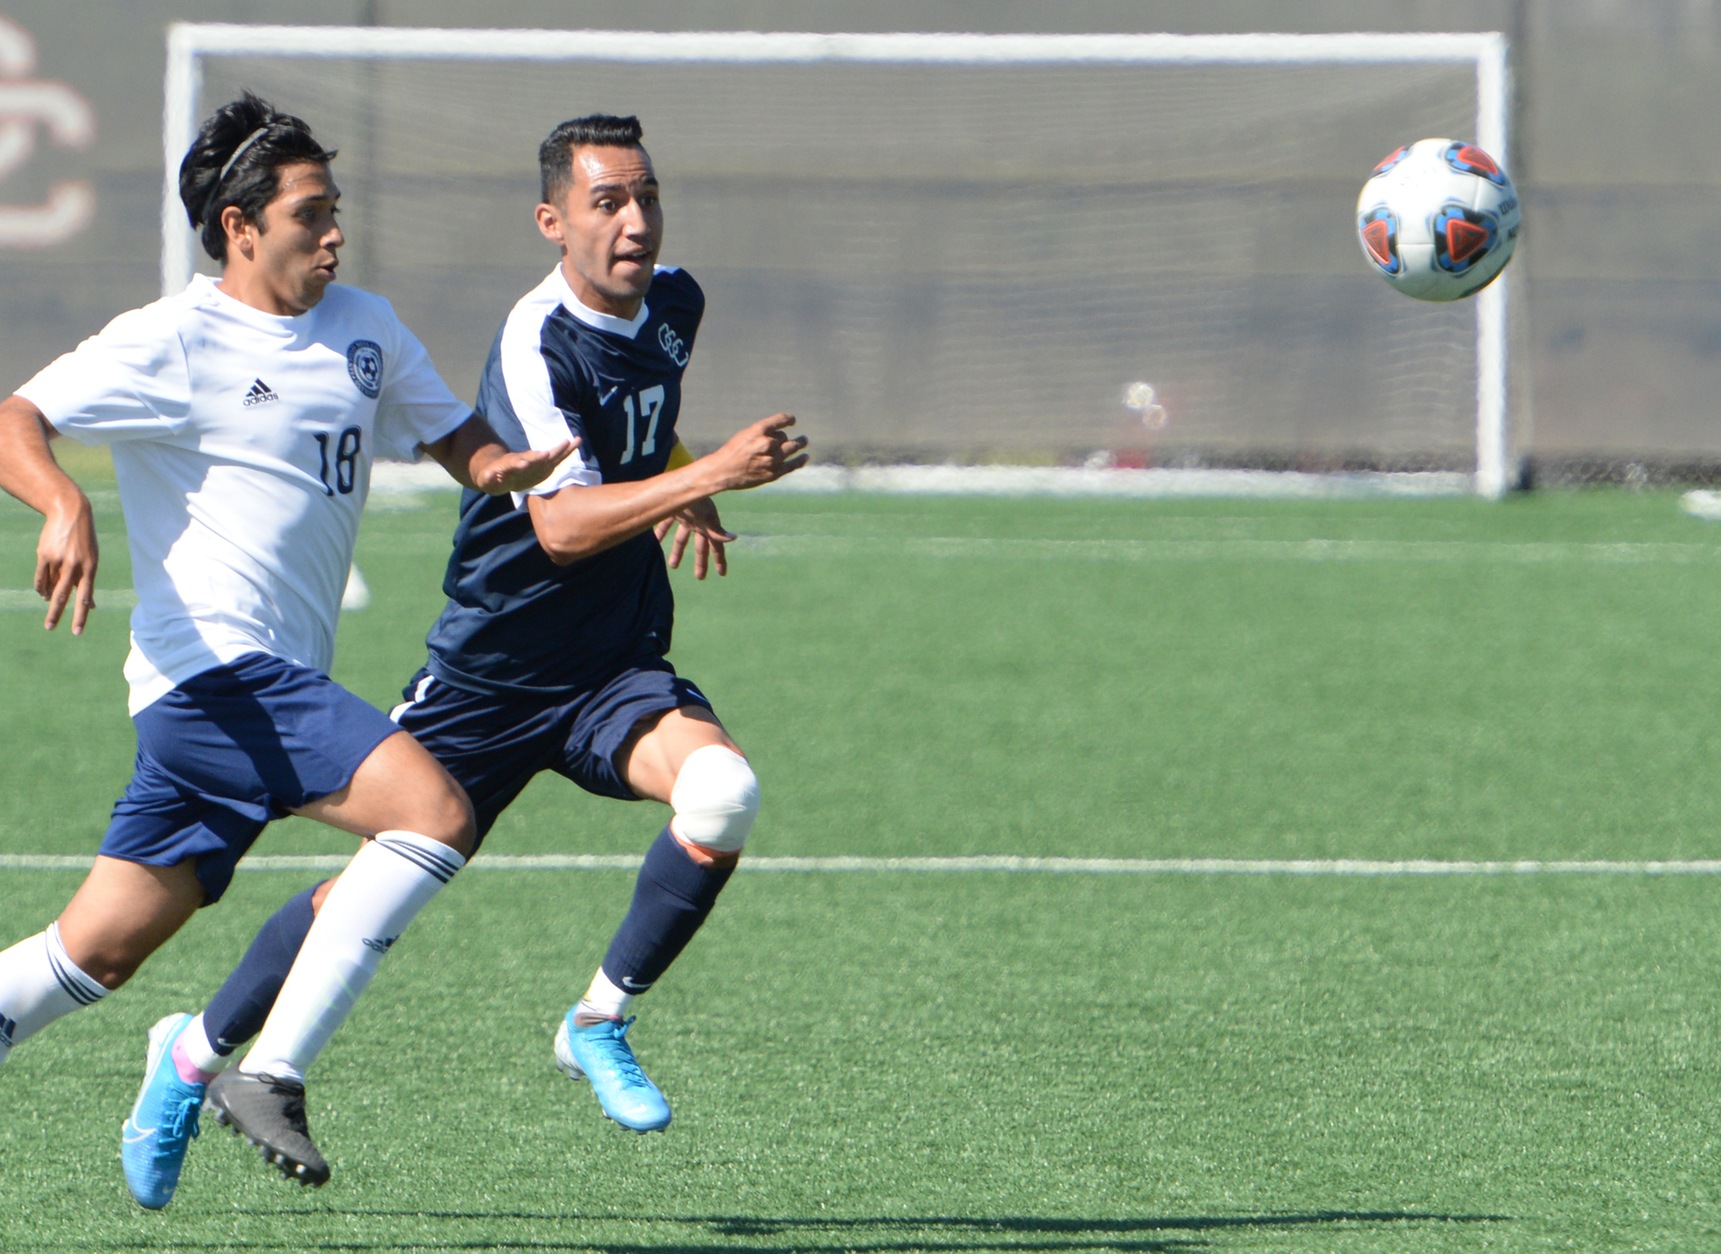 Pirates wrap up nonconference play with 2-0 win over Knights